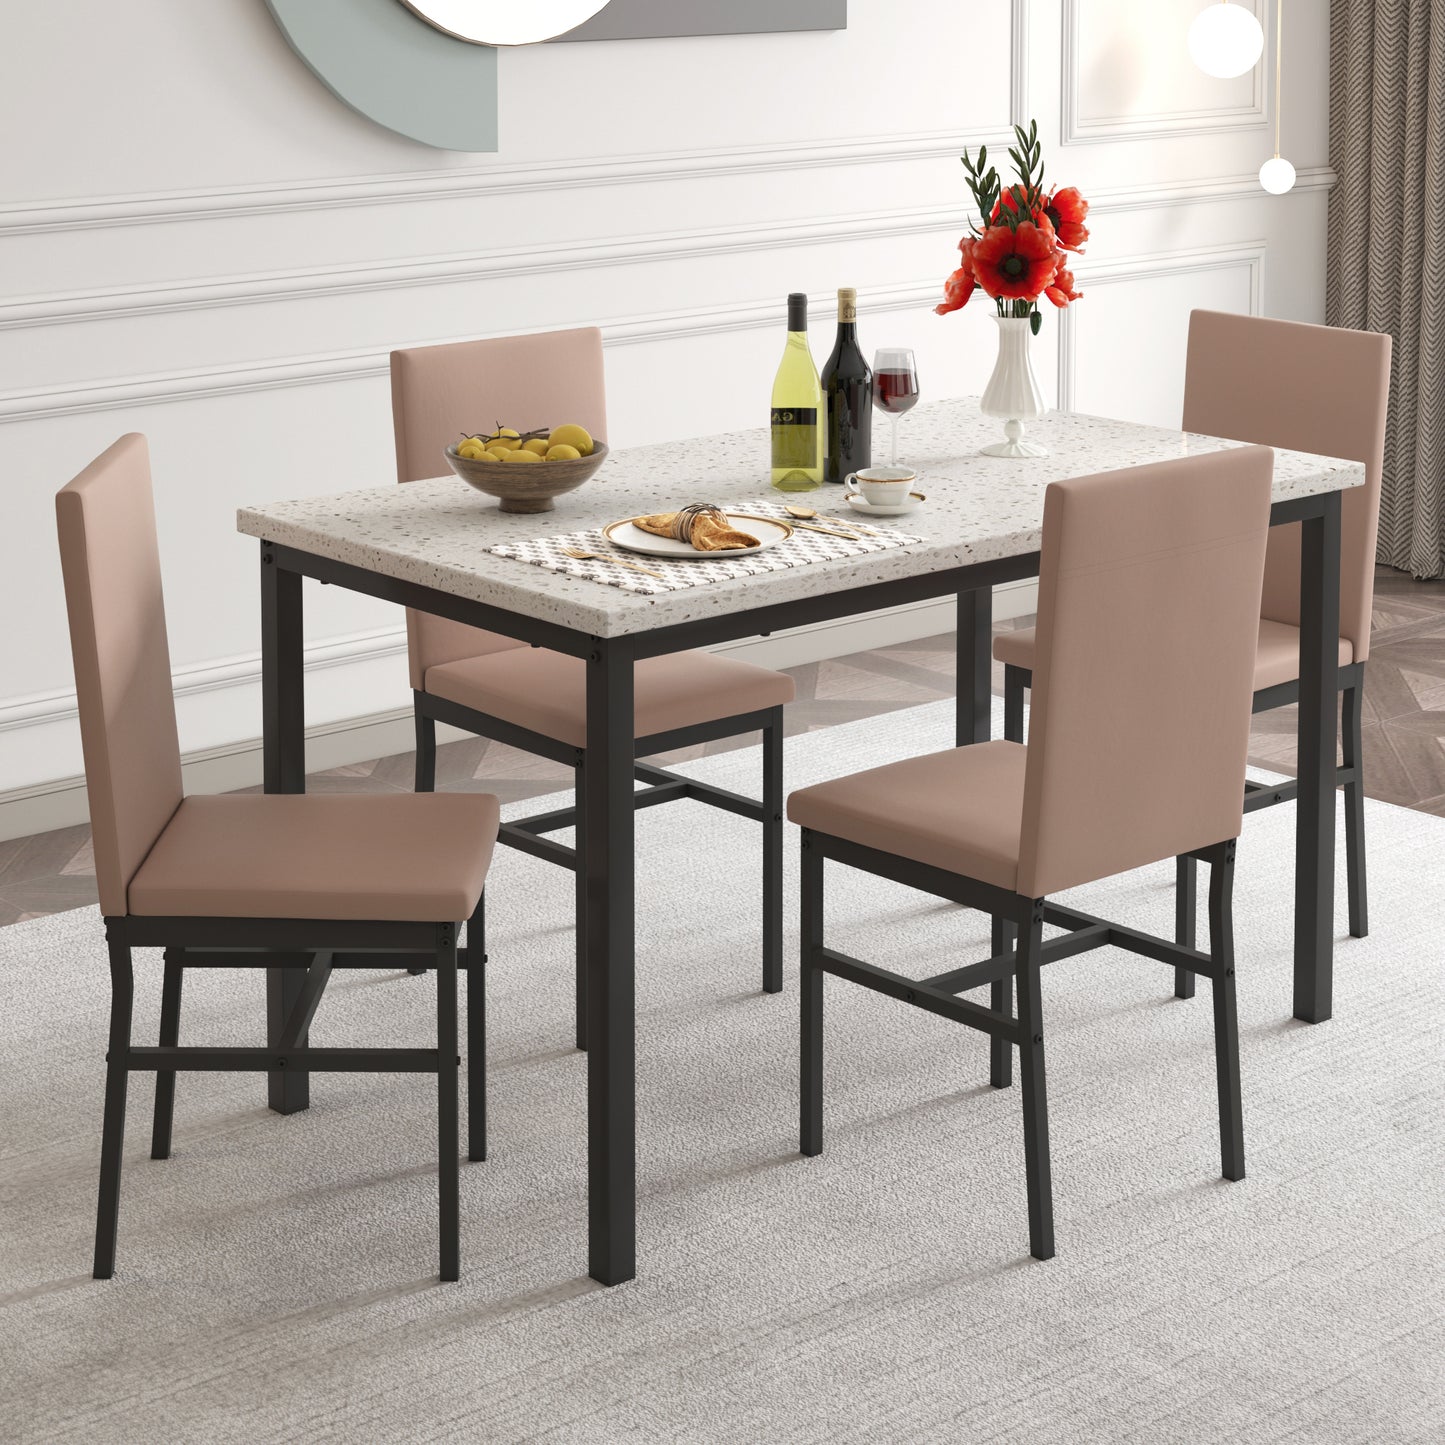 Modern Dining Table Set for 6, Faux Marble Table and PU Leather Upholstered Chairs Set, 7 Piece Kitchen Dining Set, Dining Table and Chairs Set for Small Space, Breakfast Nook, D9207